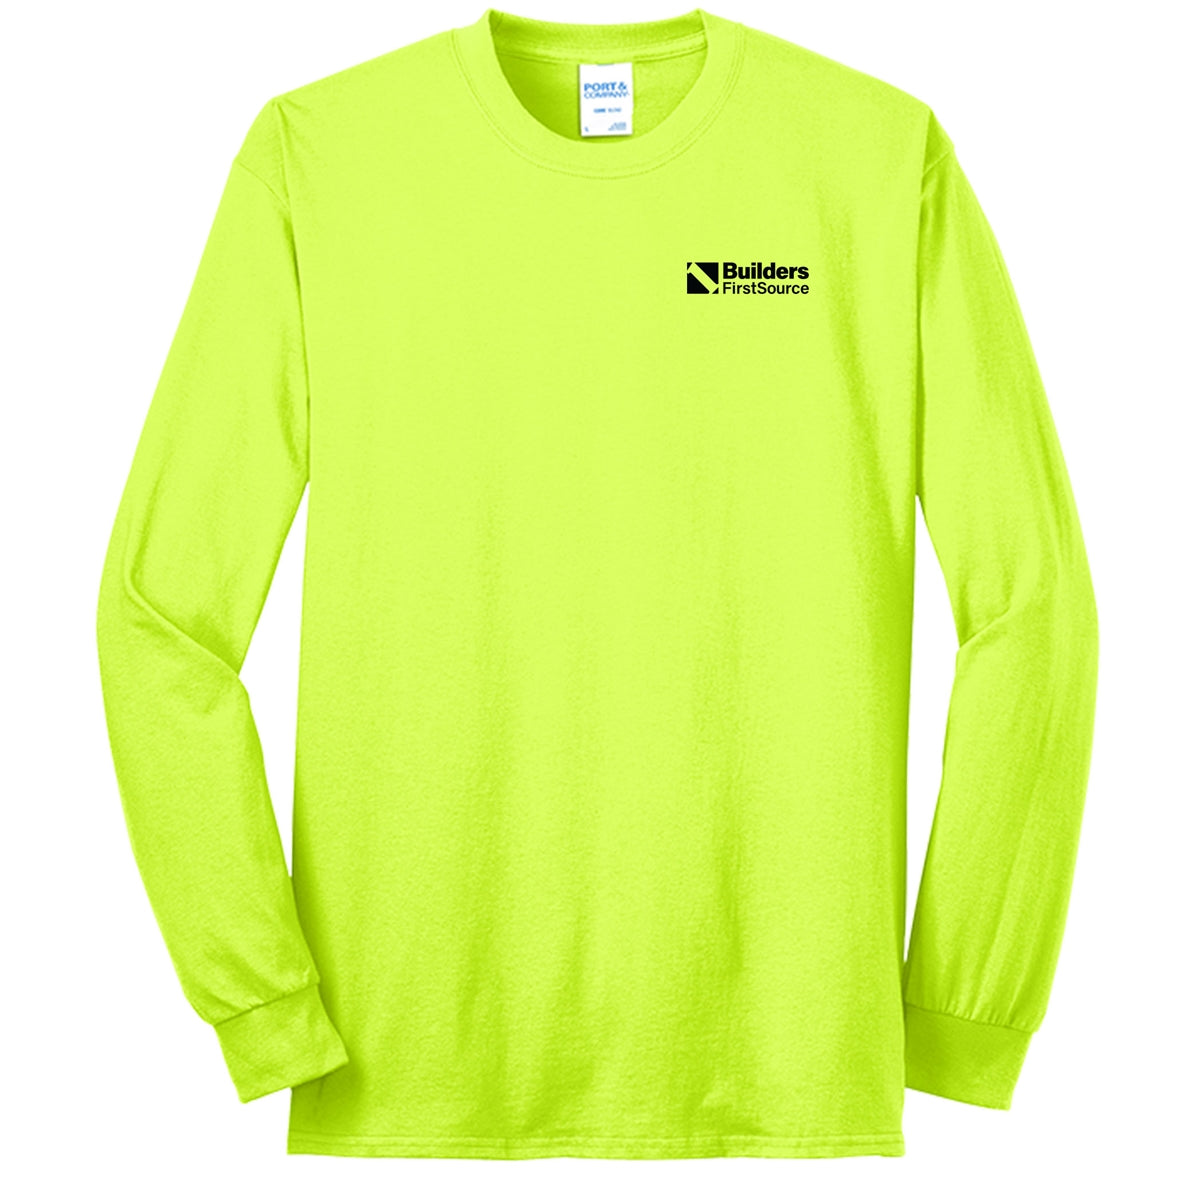 Drive to Zero Dedicated Safety Long Sleeve Core Blend Tee